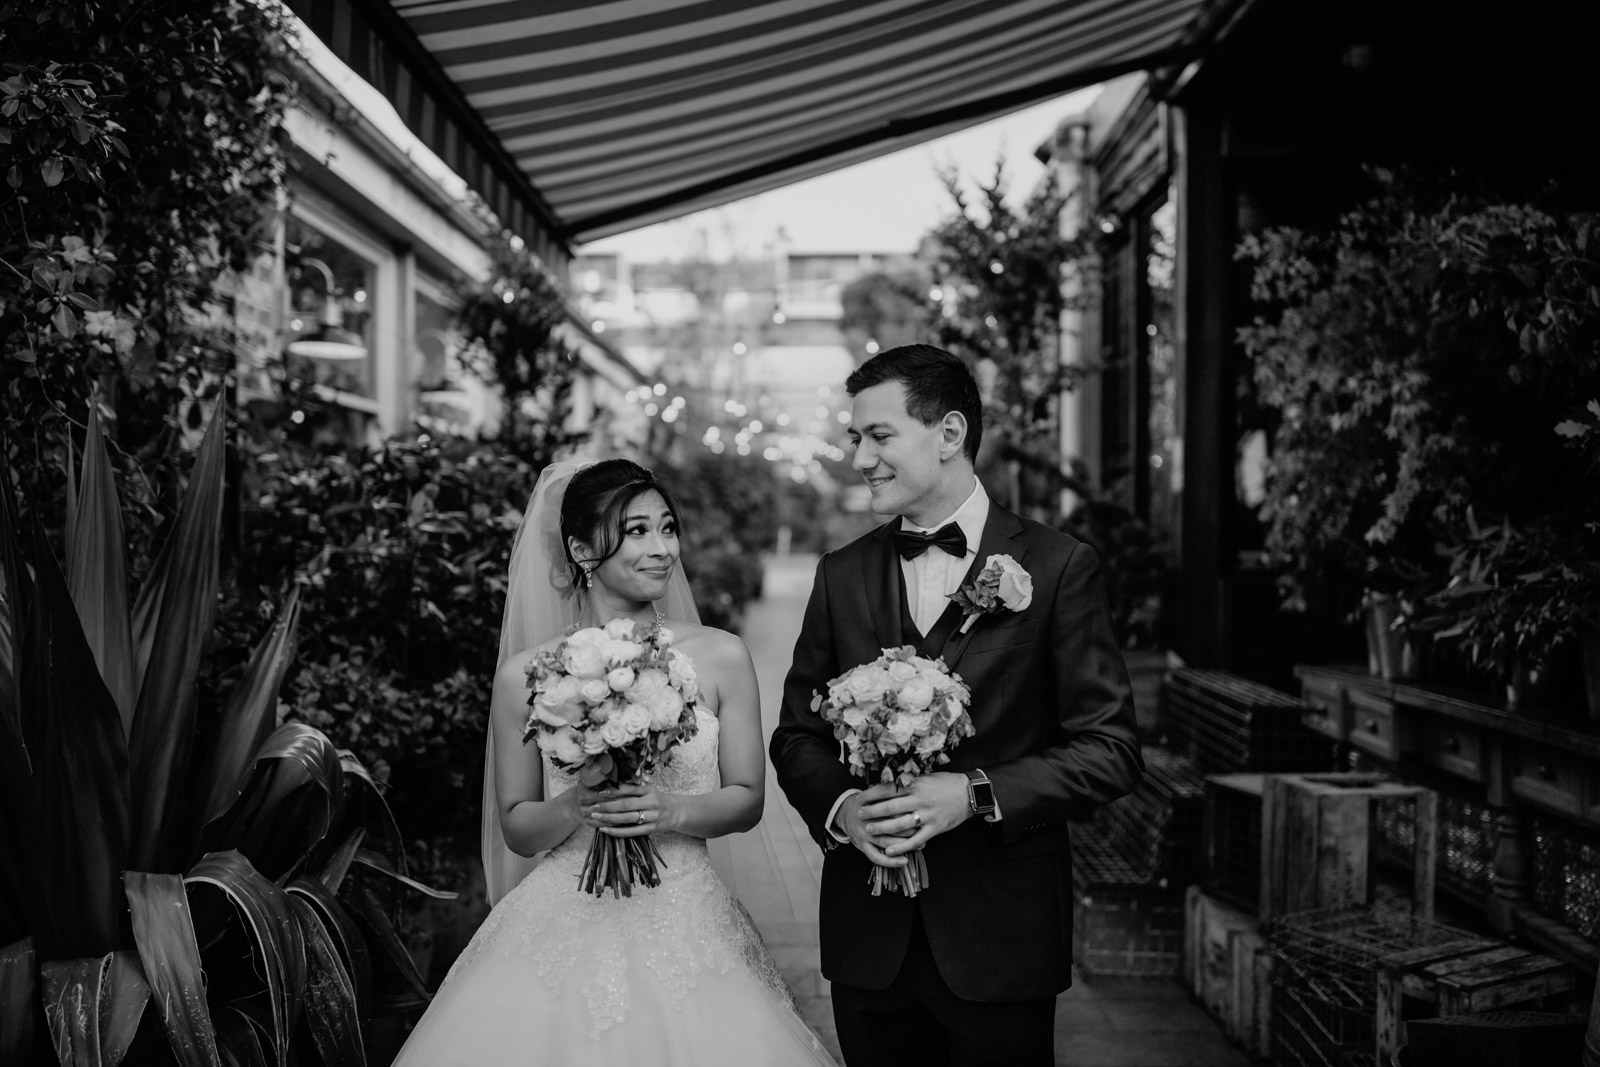 A black and white photo of a man and woman on their wedding day, both holding bouquets of roses. In the background are some plants and wooden crates.